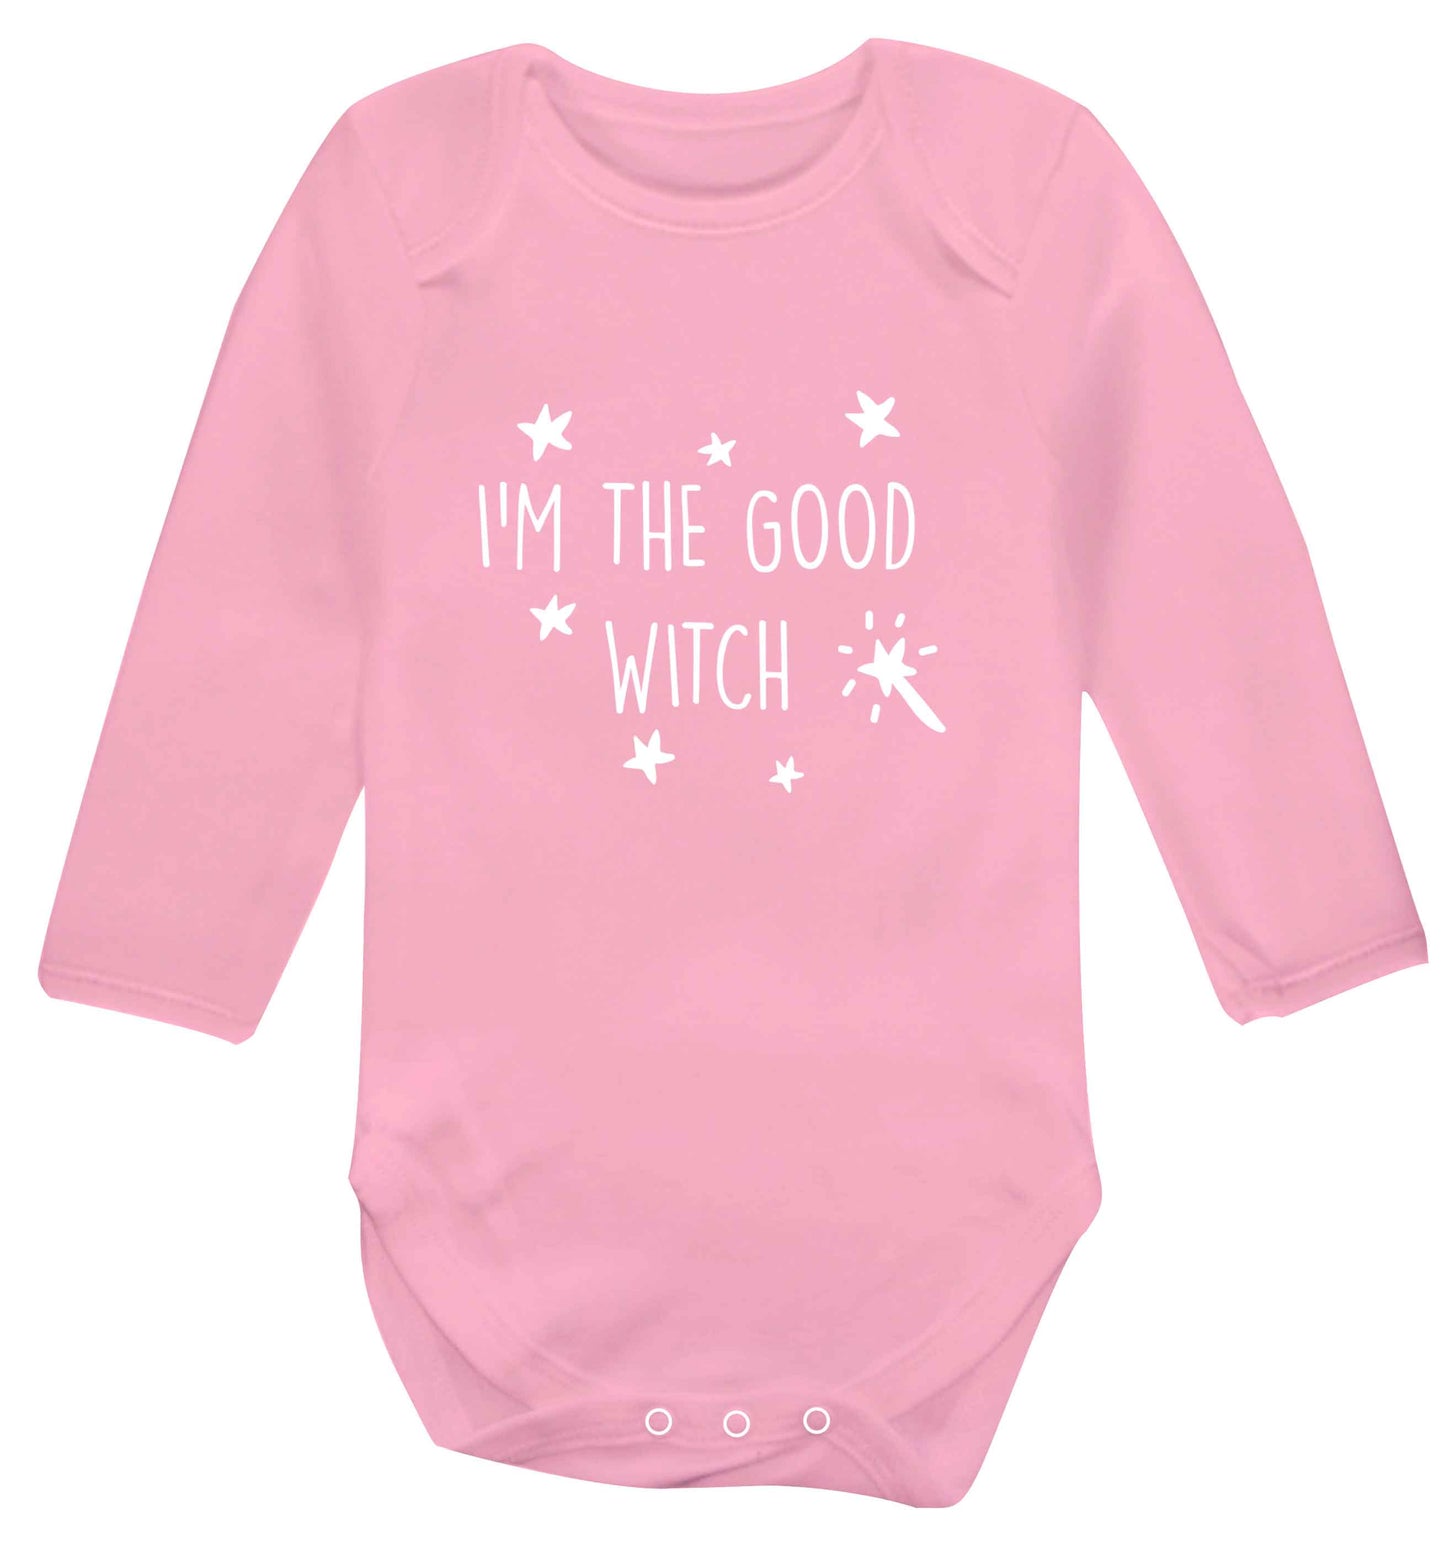 Good witch baby vest long sleeved pale pink 6-12 months